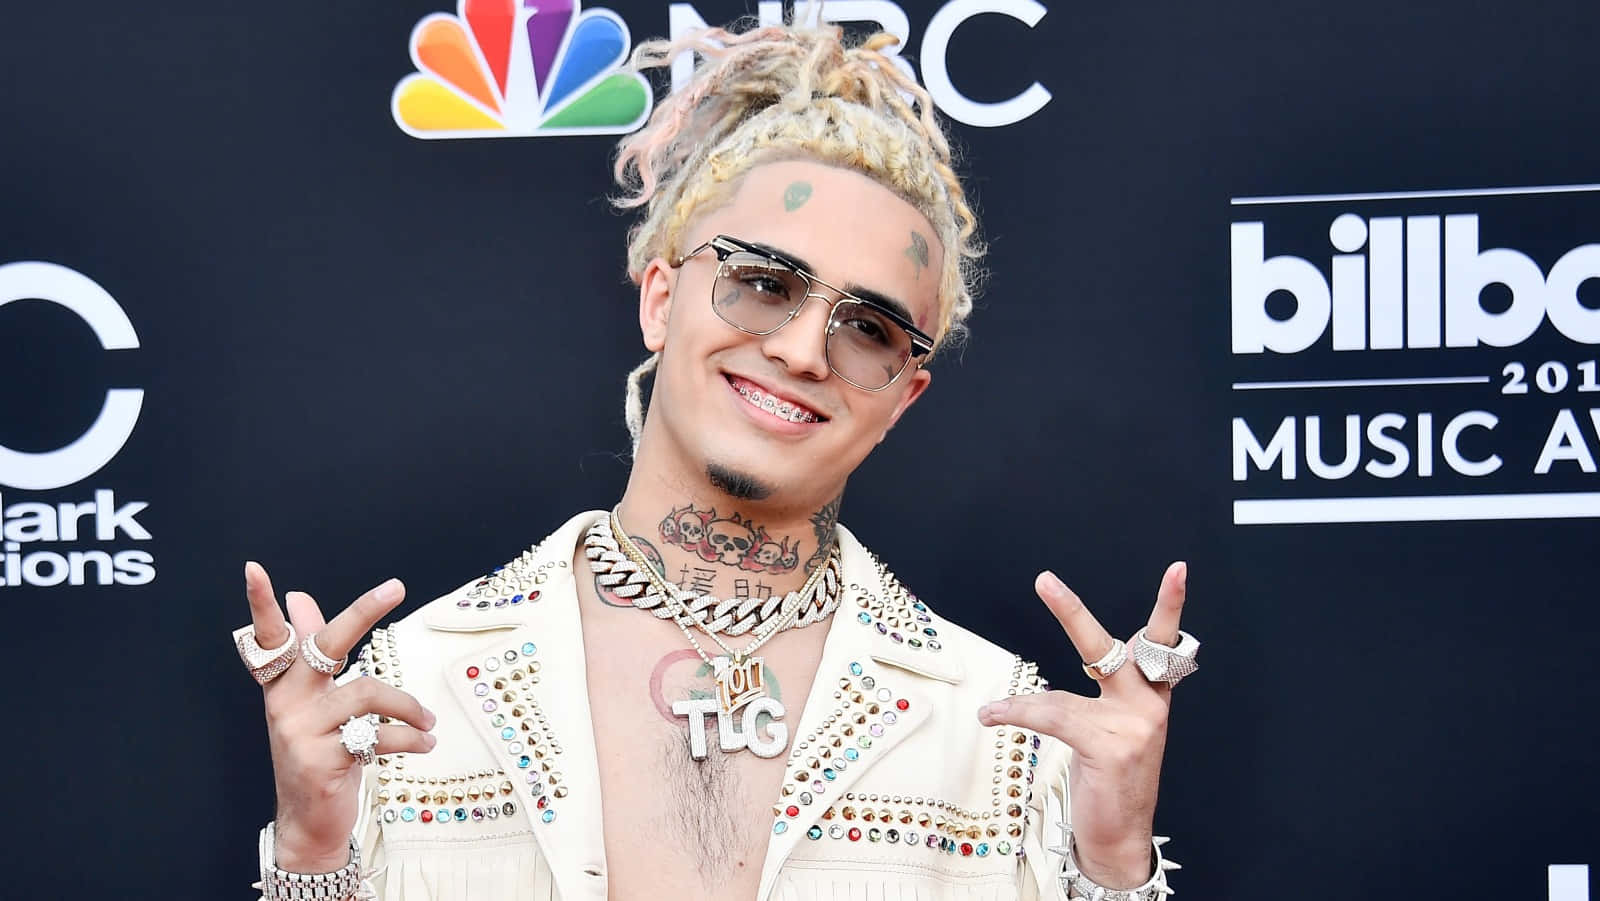 Rapperlil Pump Is An American Hip Hop Artist Known For His Hit Songs And Unique Style. He Rose To Fame Through His Popular Singles Like 